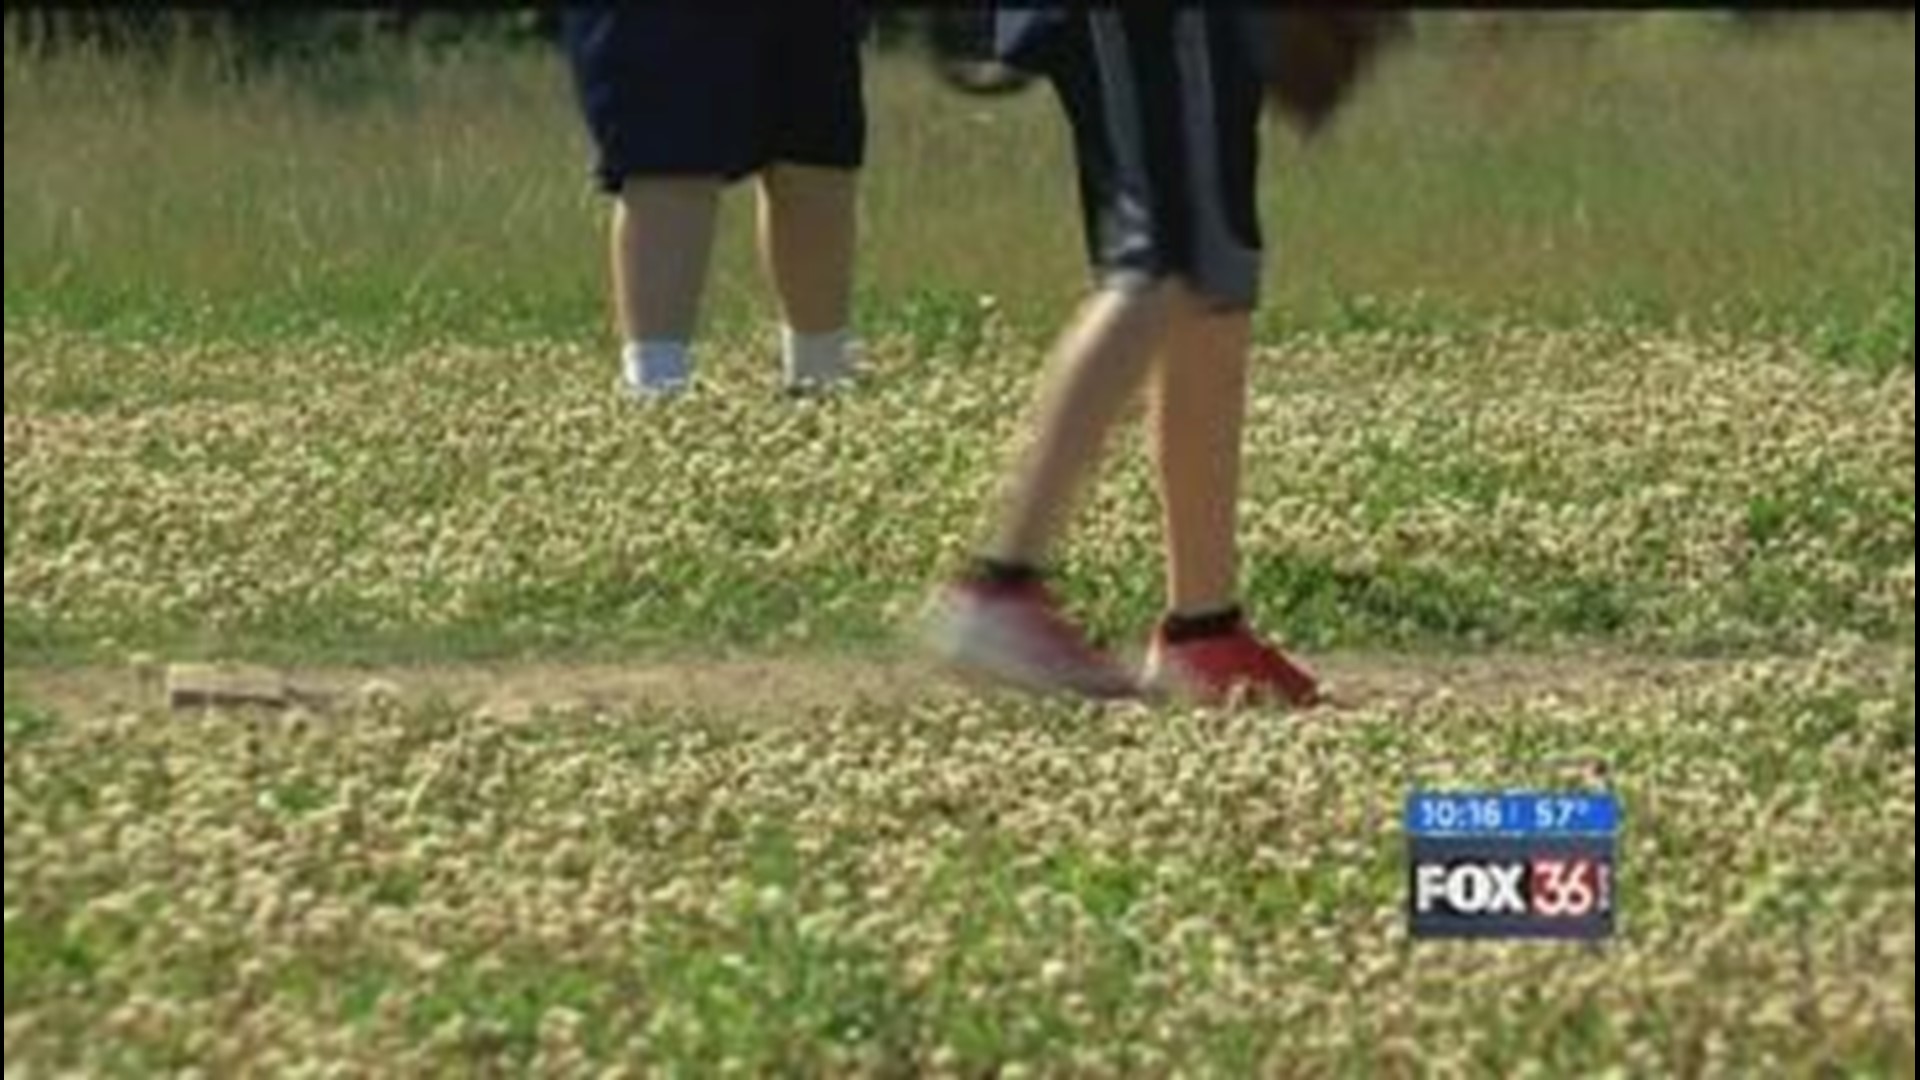 Coach, parents angered at lake of upkeep for Toledo baseball field